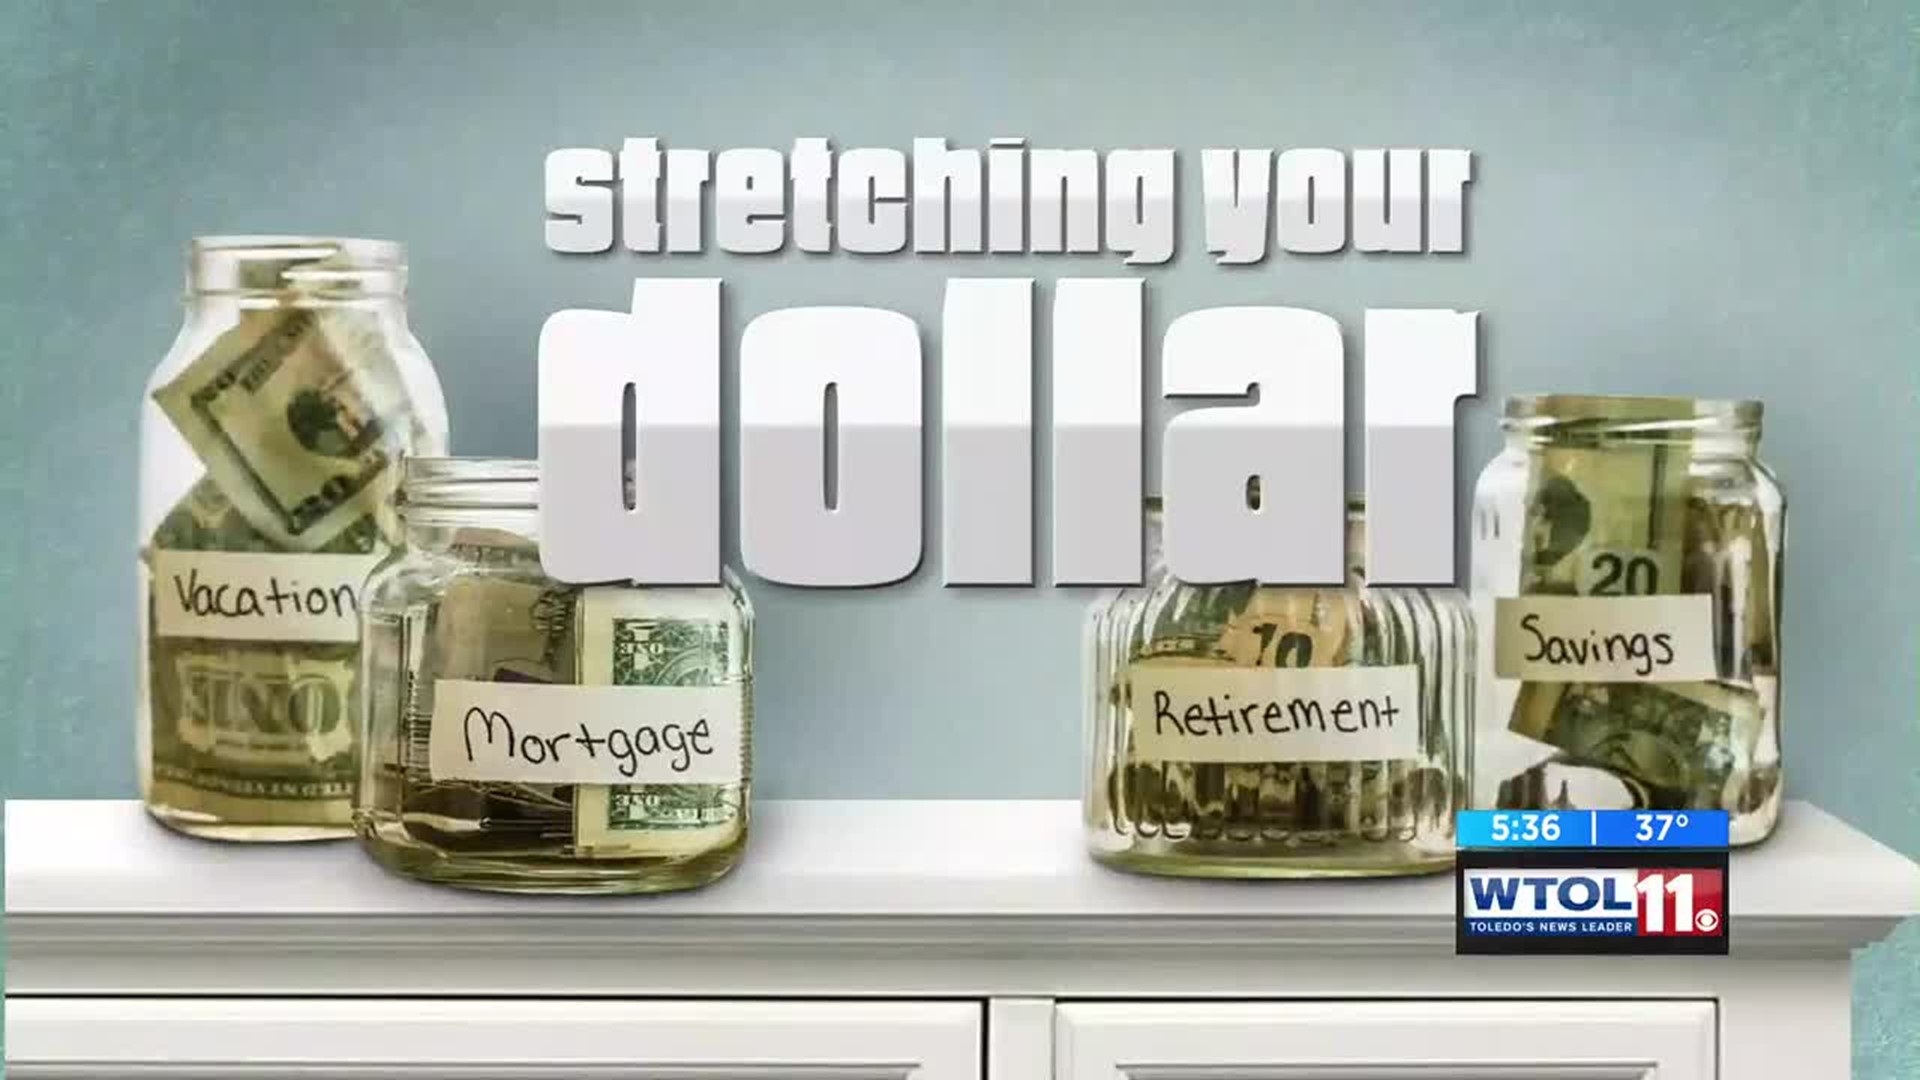 Stretching Your Dollar: How federal workers can bounce back from the shutdown